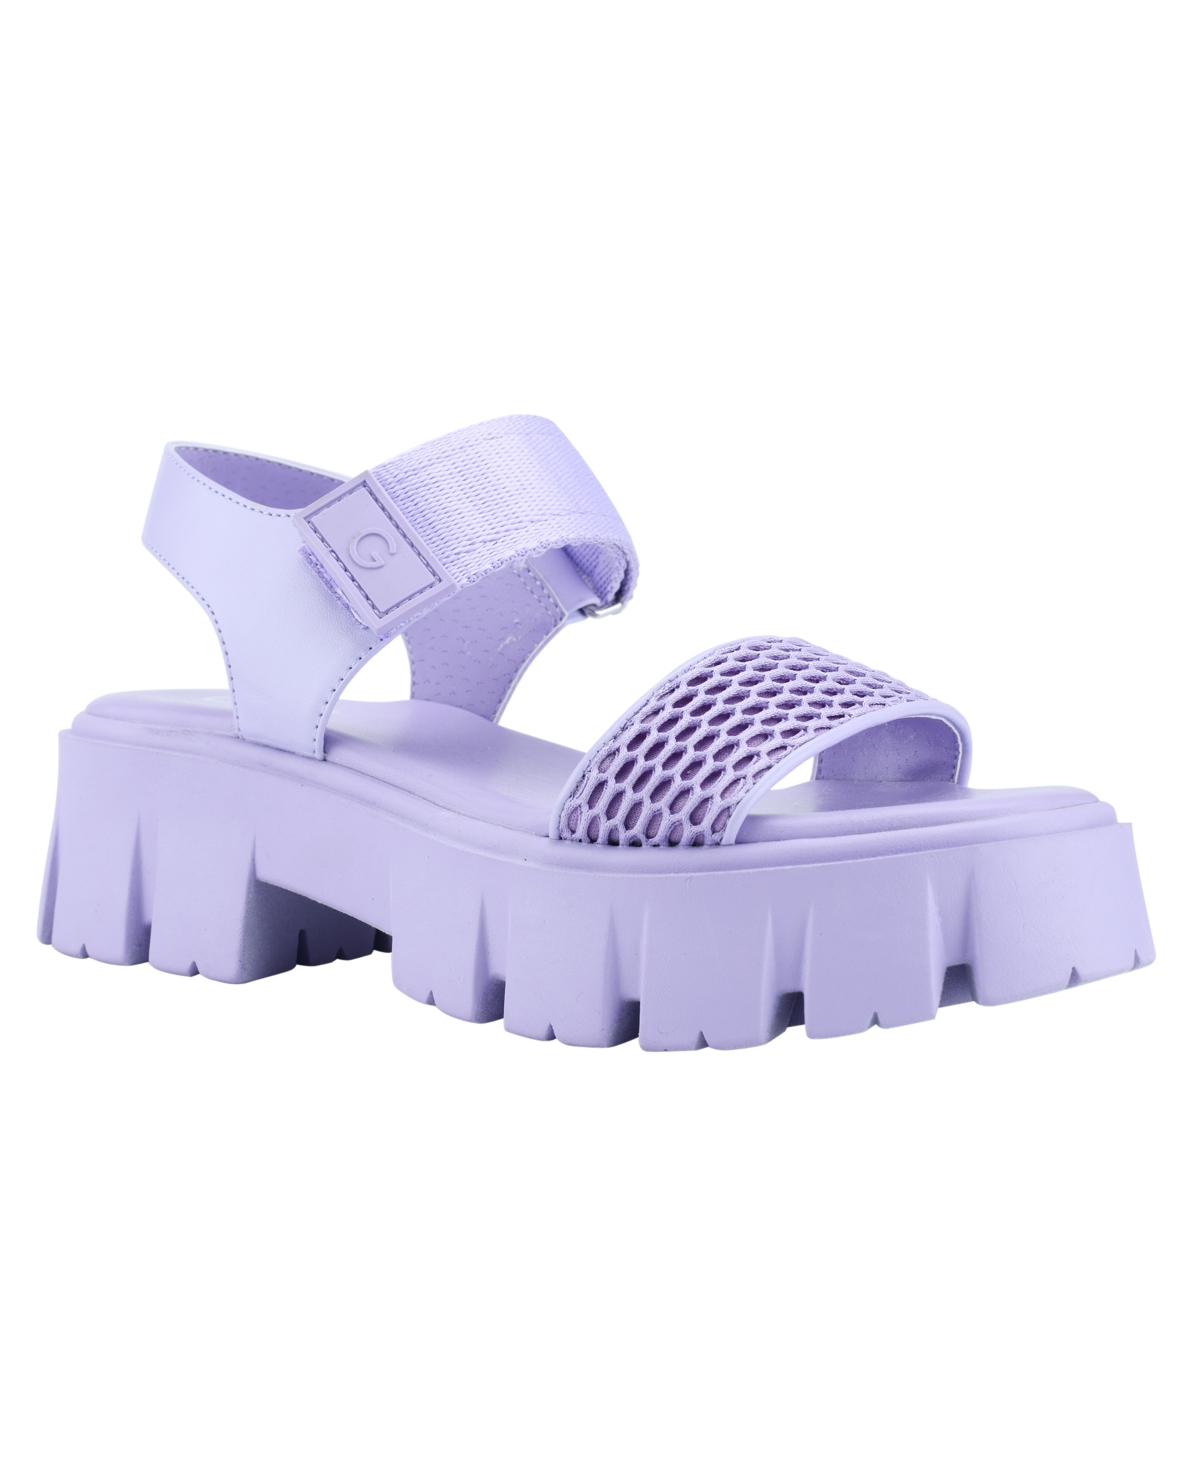 Gbg Los Angeles Women's Premia Lug Sole Sandals Women's Shoes In Lilac